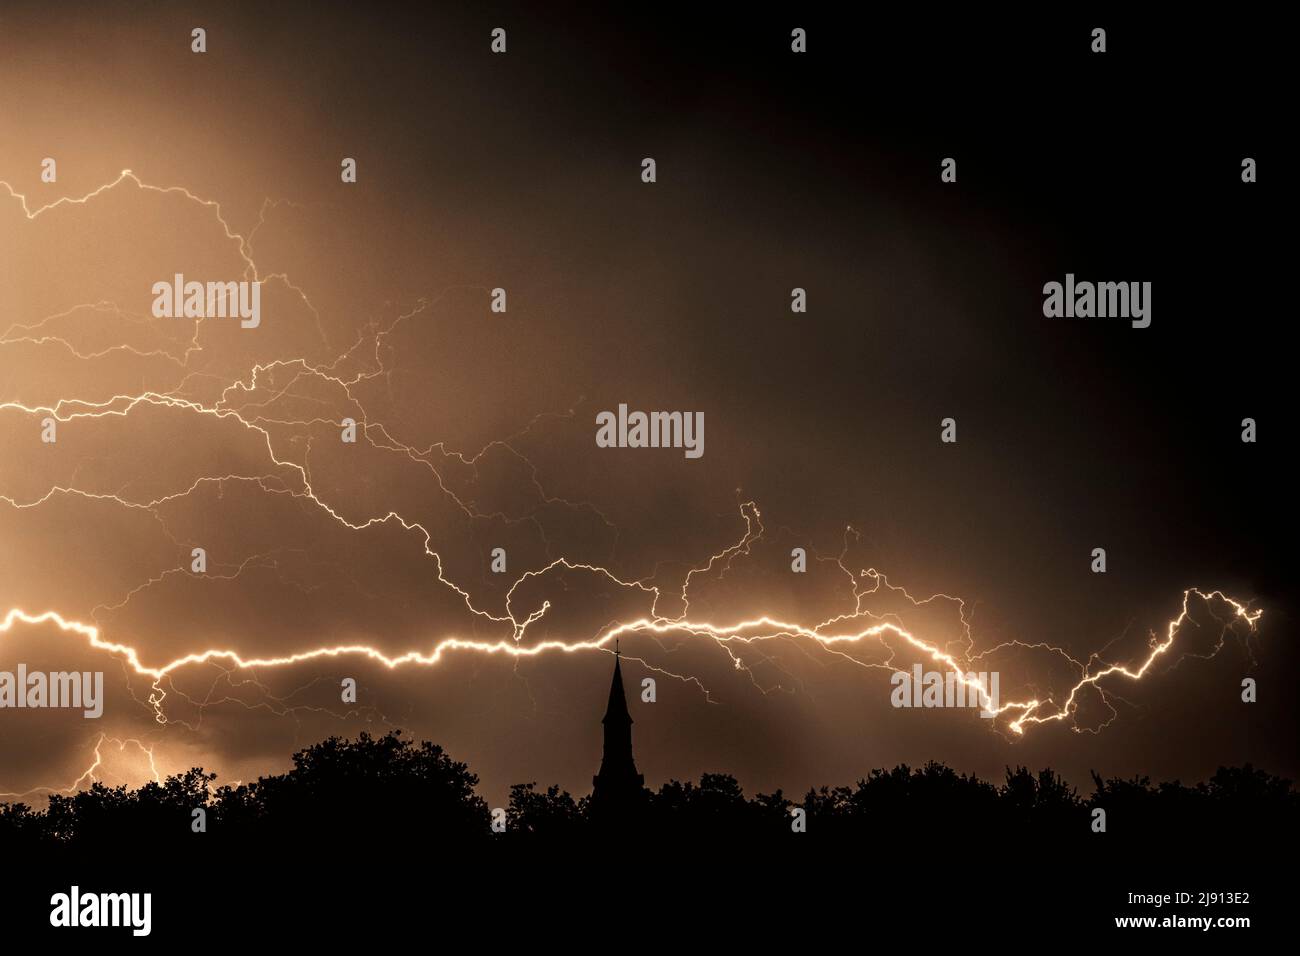 Rain falling and strokes of forked lightnings during thunderstorm at night over church tower and trees Stock Photo